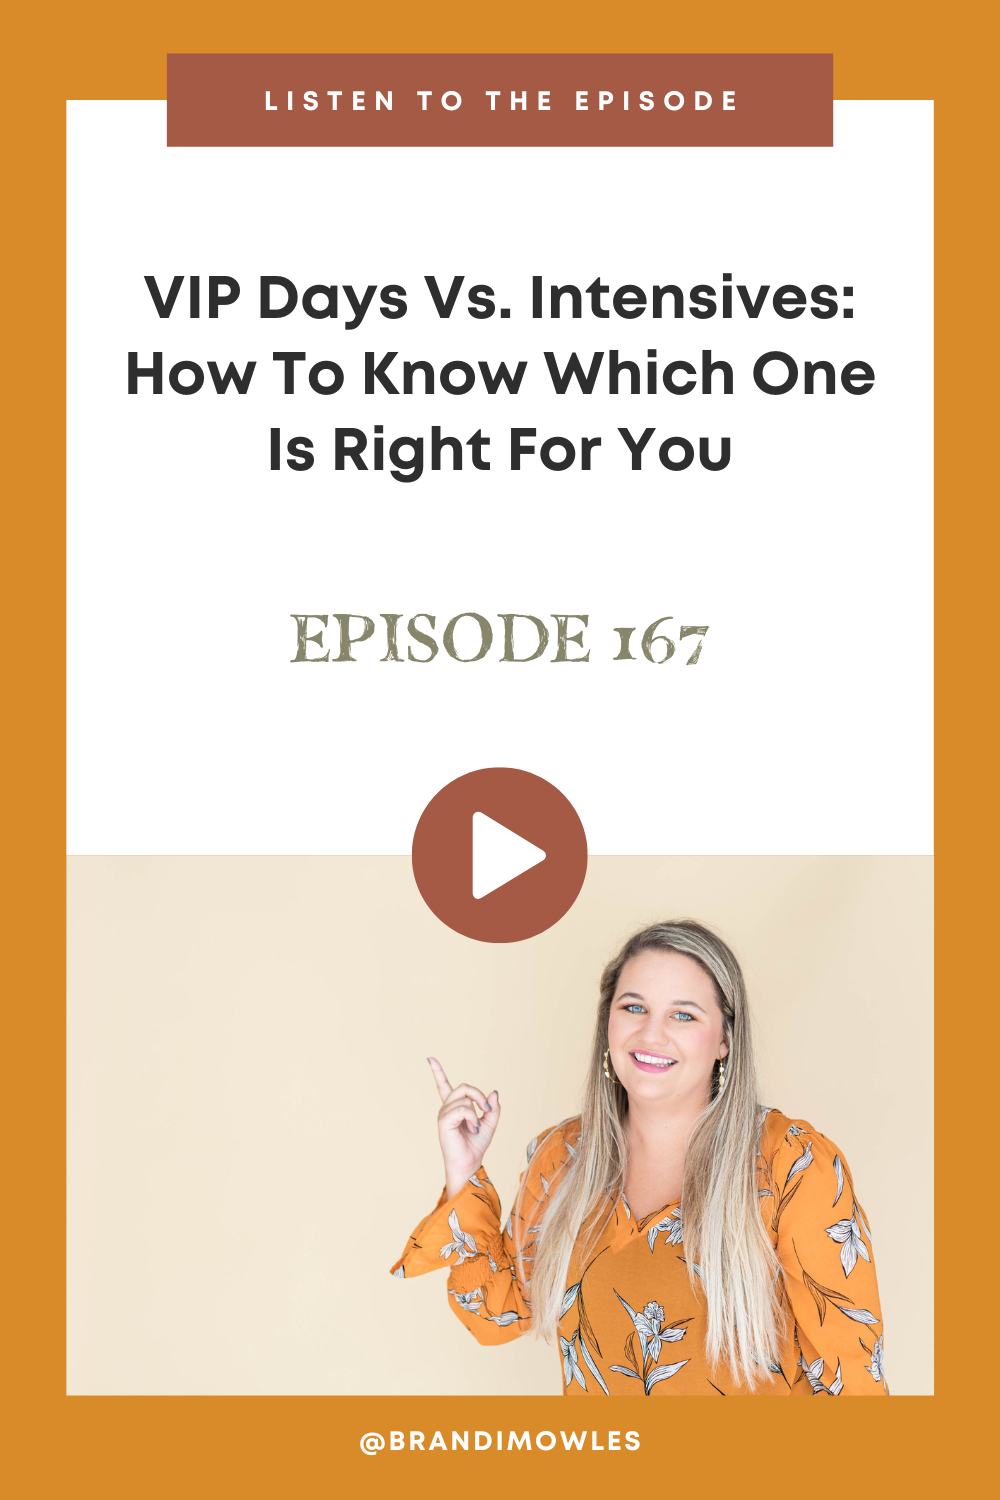 Brandi Mowles podcast episode feature about VIP Days and Intensives